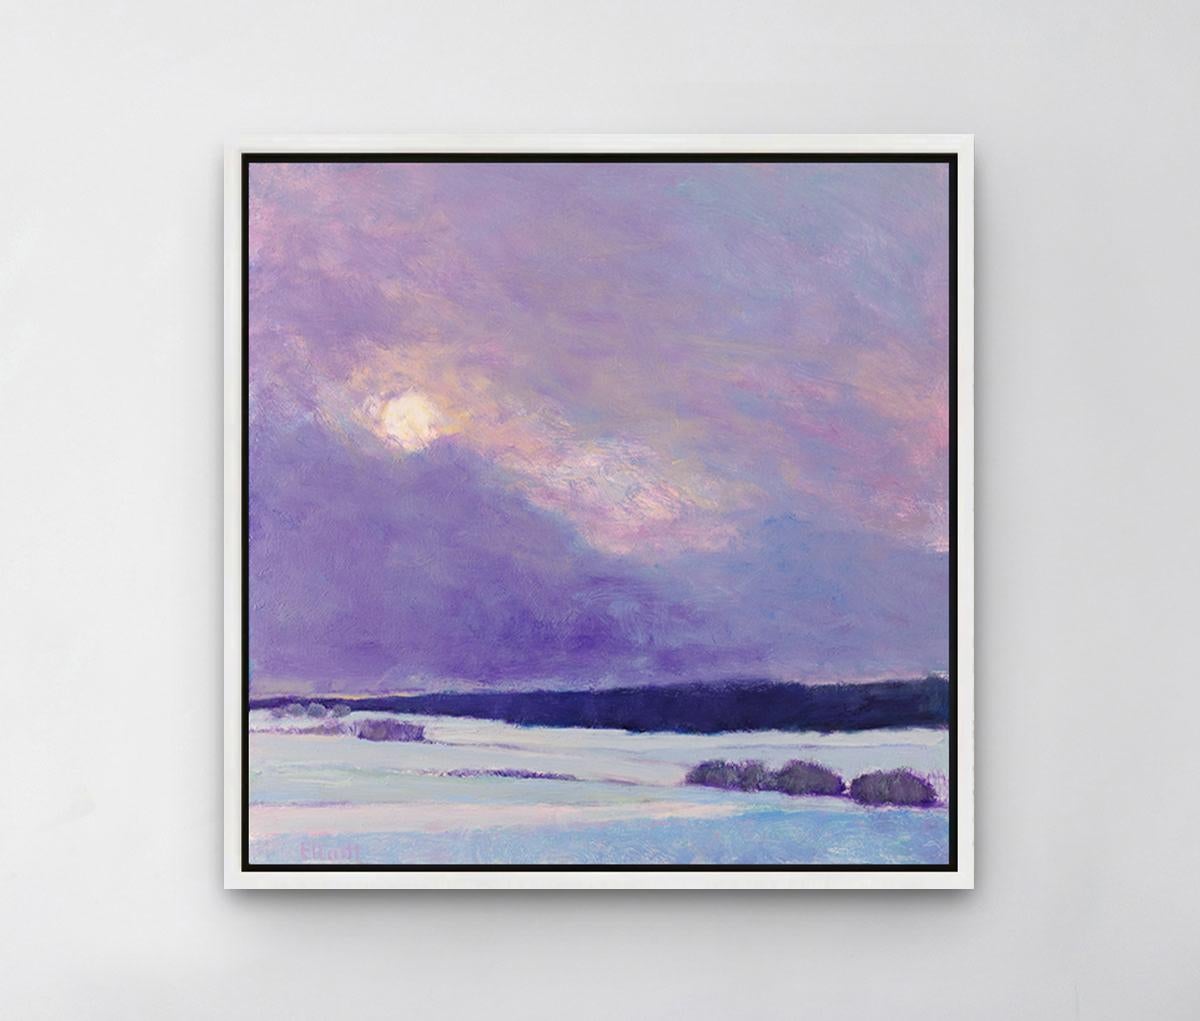 This colorful abstract landscape piece is a Limited-Edition giclee print by Ken Elliott with an edition of 195. Printed on canvas, this giclee ships framed in a silver floater frame wired and ready to hang. Other floater frame options are available